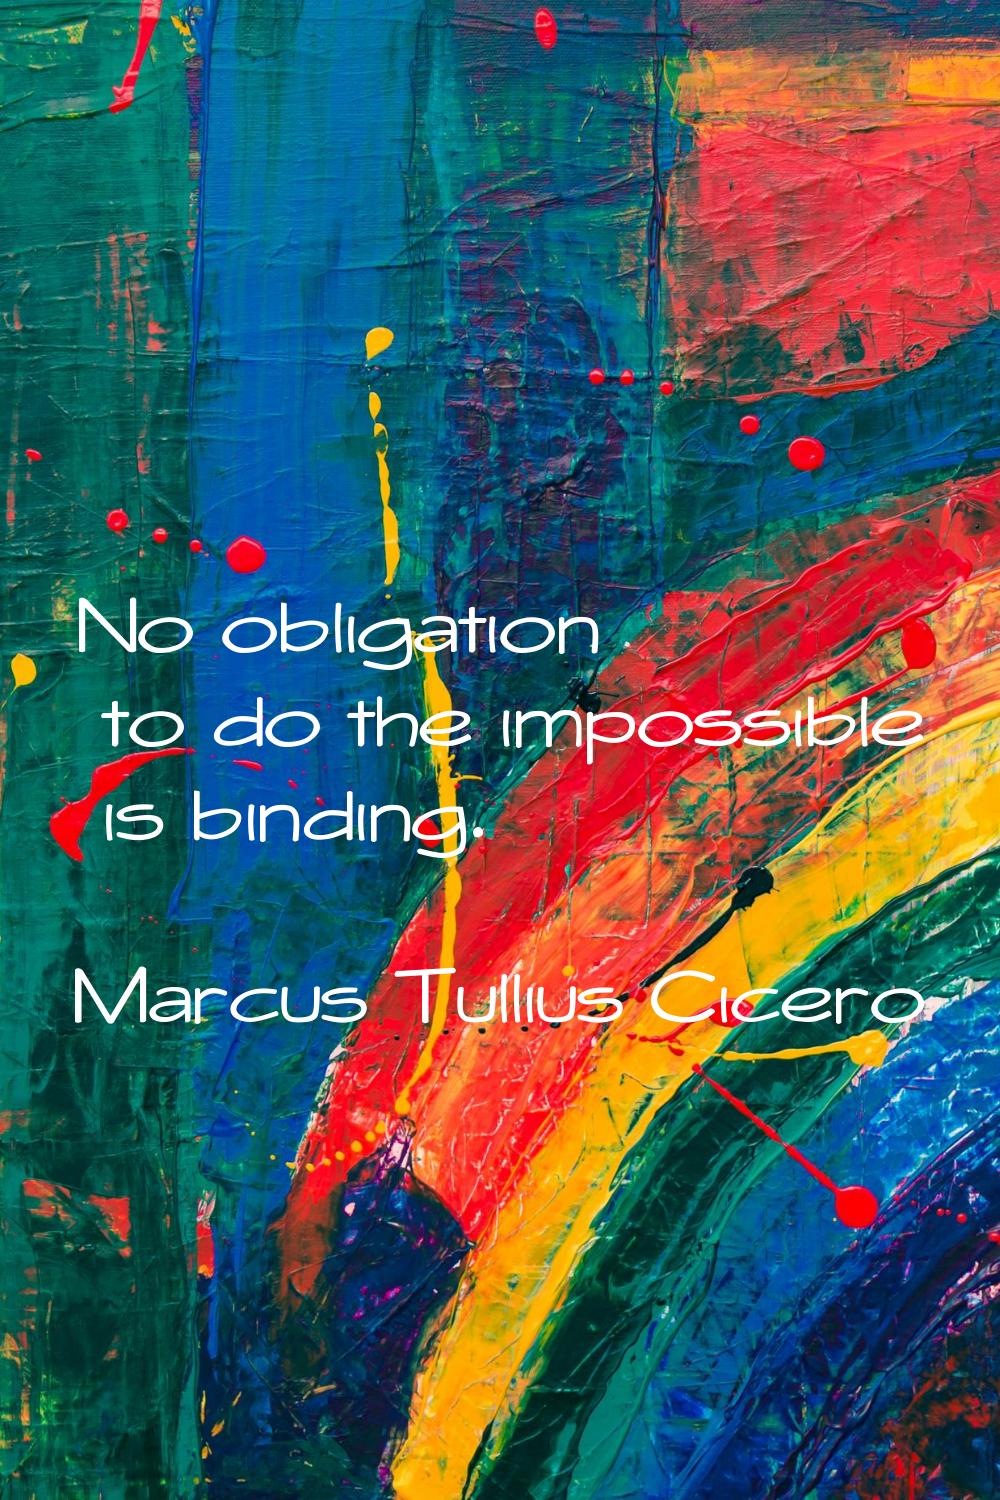 No obligation to do the impossible is binding.